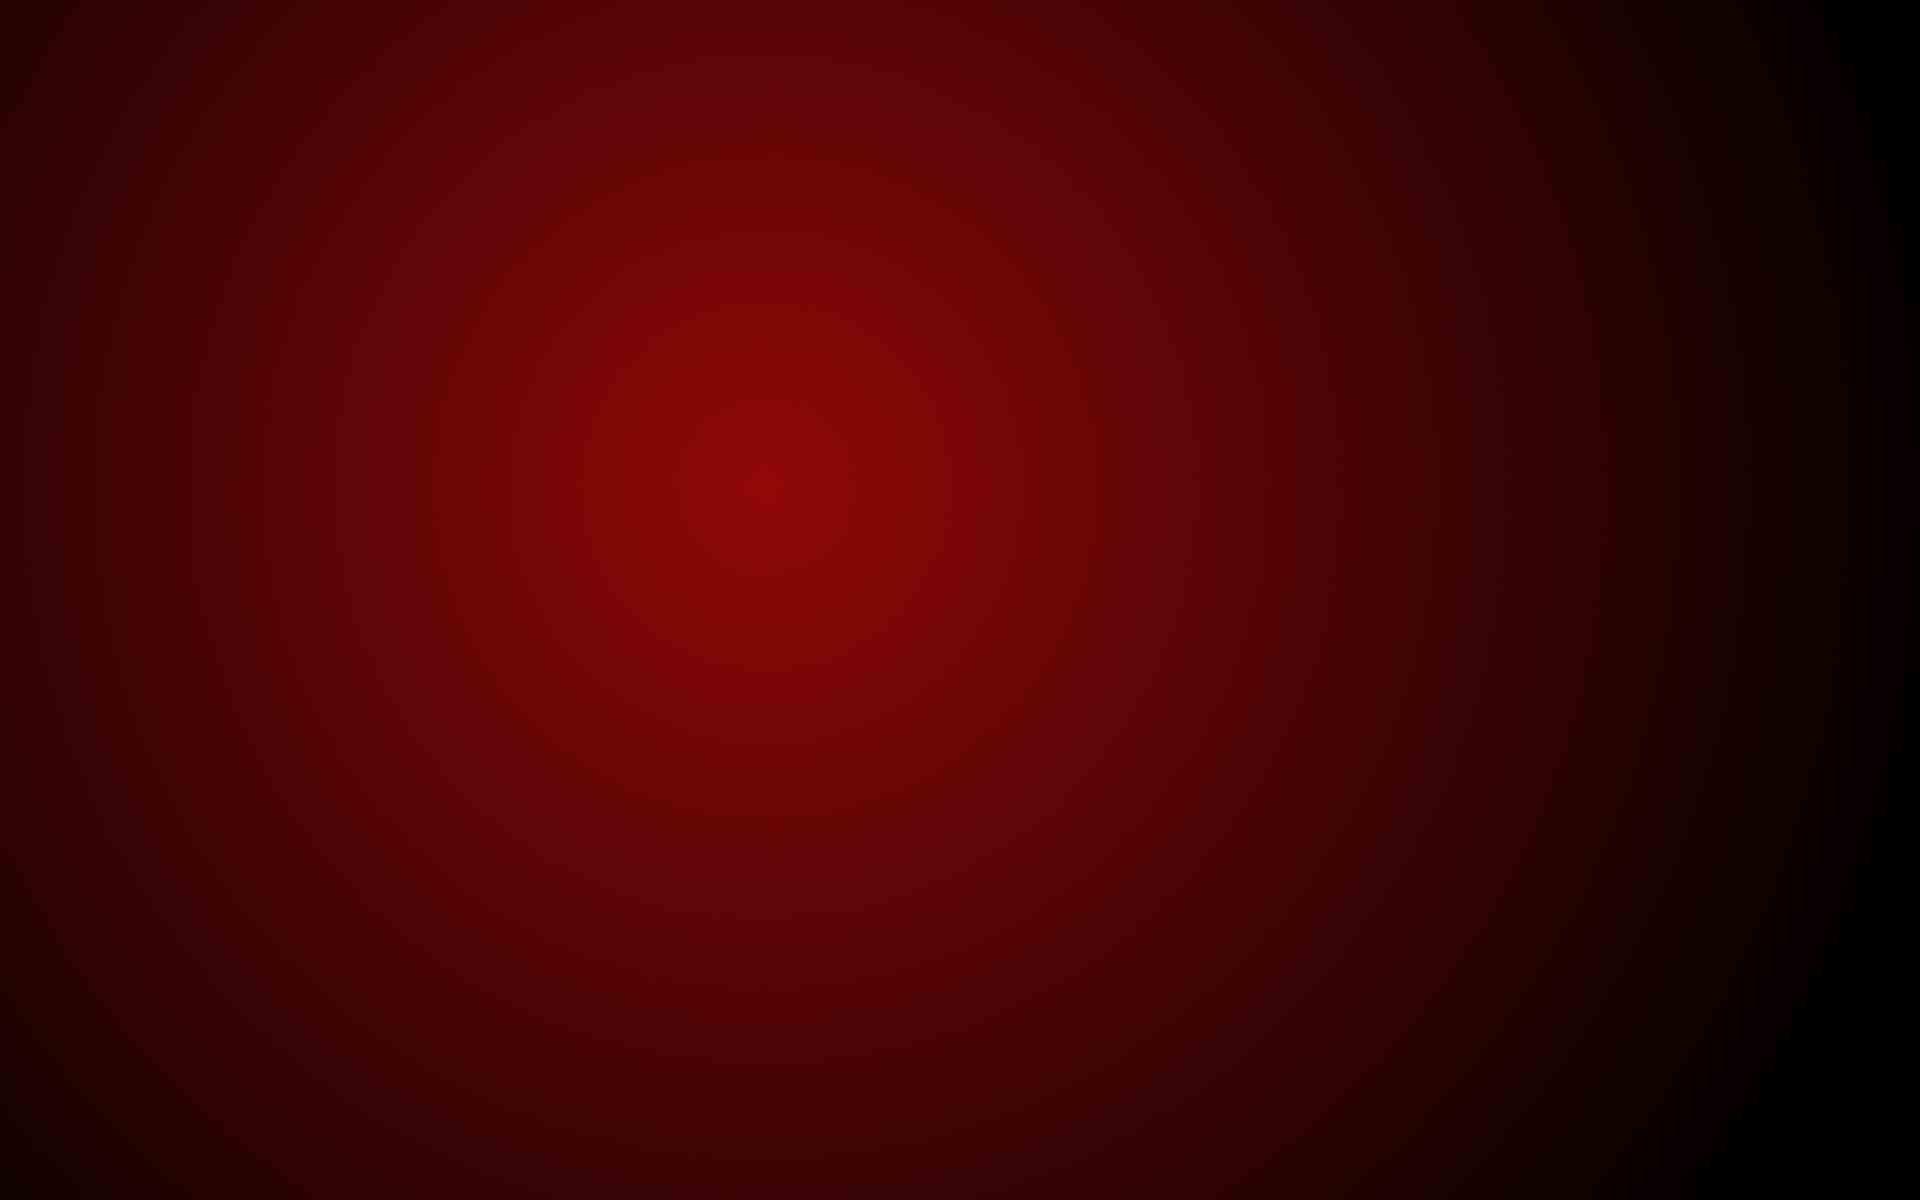 Plain Red backgroundDownload free amazing High Resolution